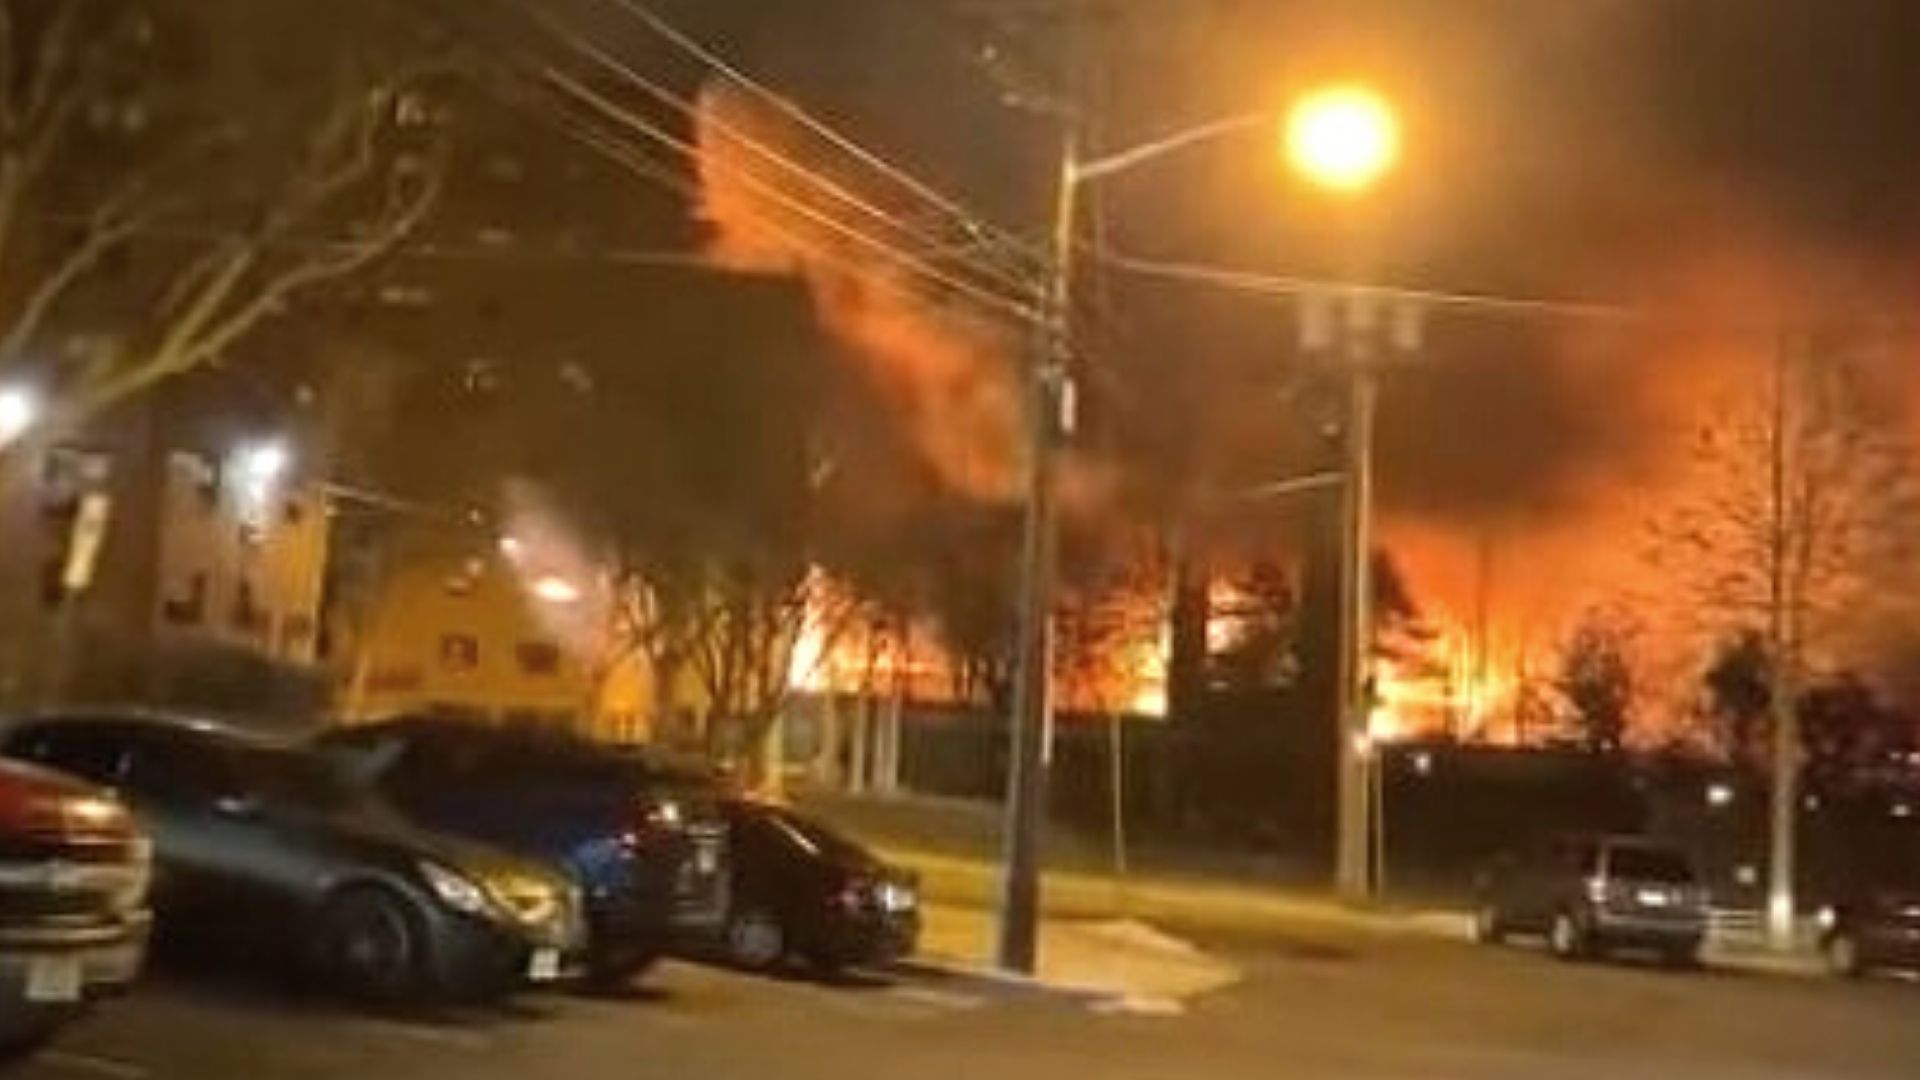 Passaic, NJ Resident Evacuated As an 11-alarm Chemical Fire Rages Downtown